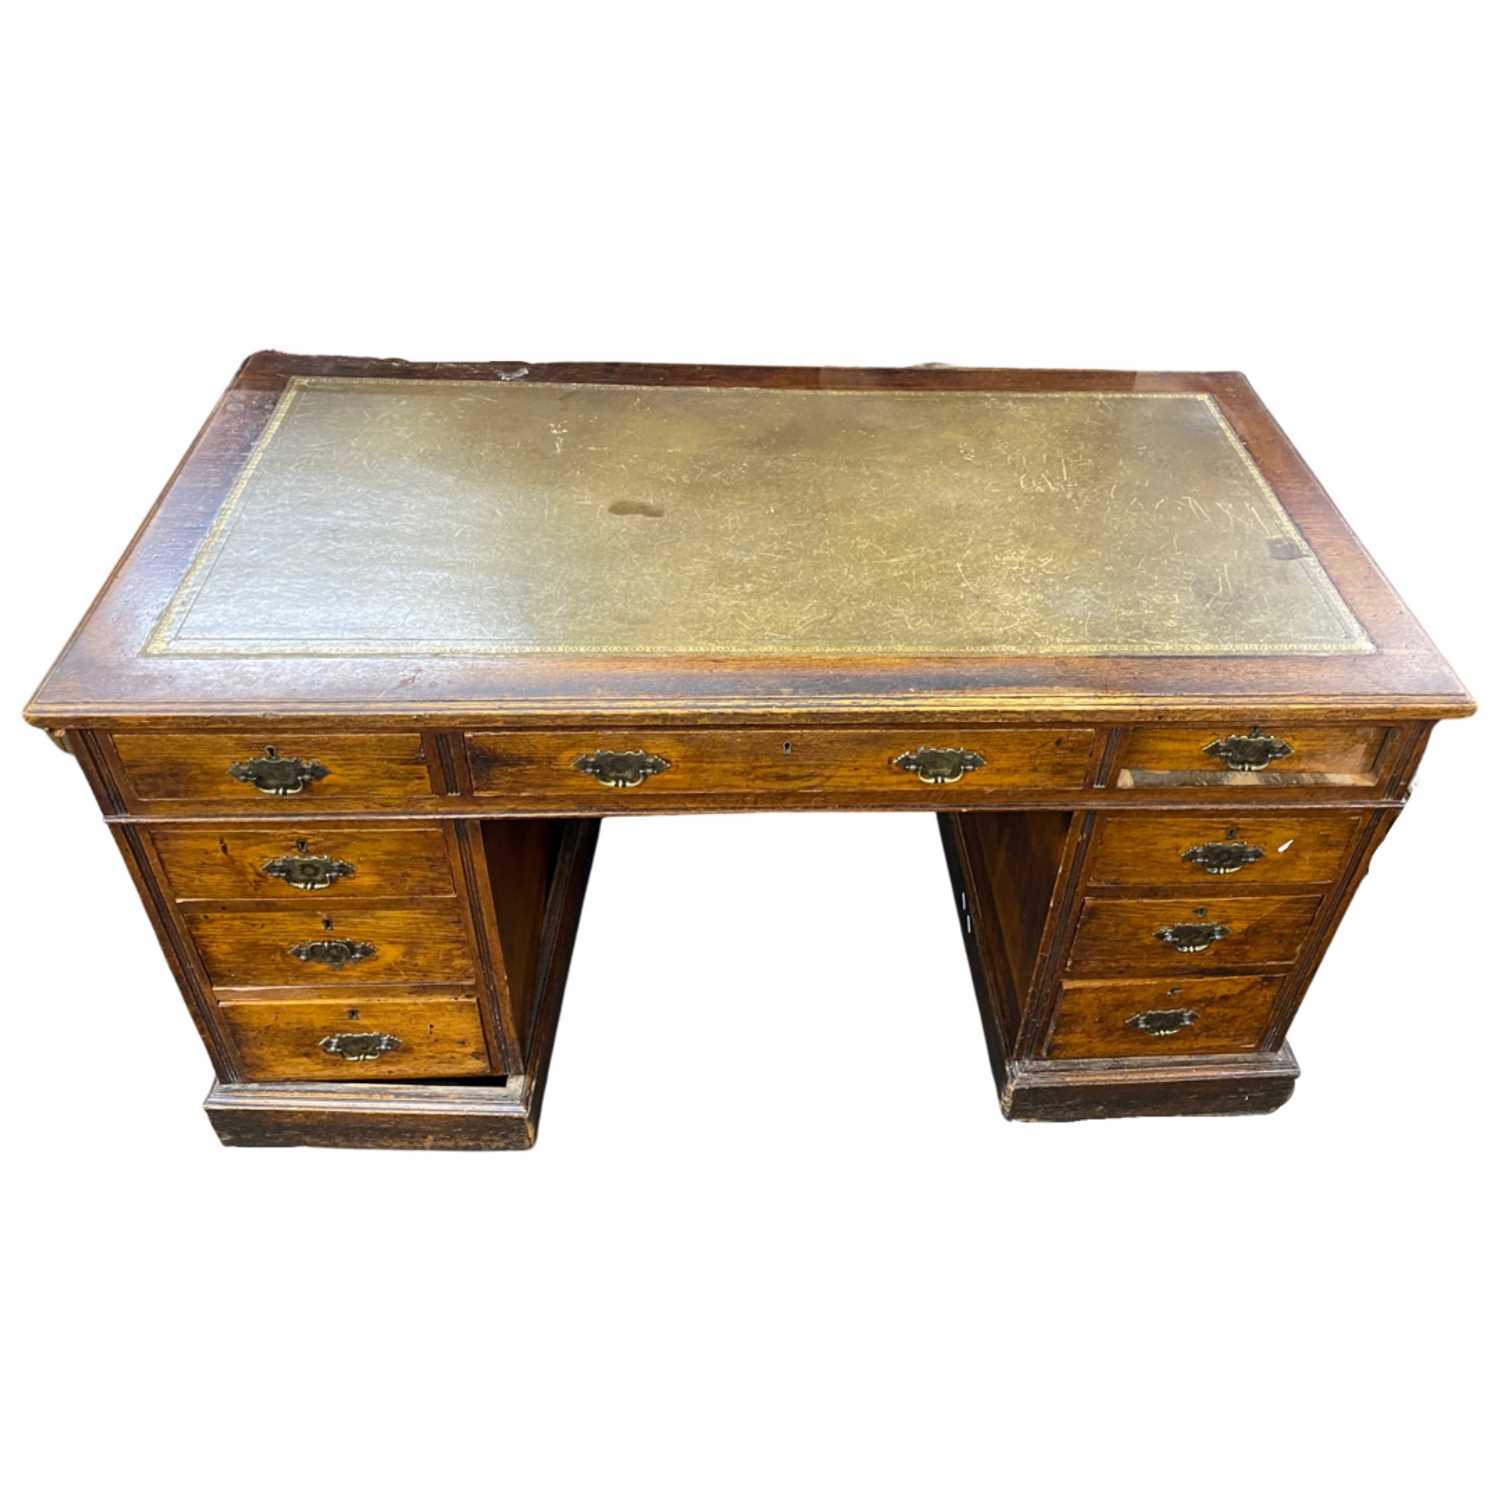 Late Victorian oak twin pedestal desk with leather inset writing surface and nine drawers, 138cm - Image 2 of 2